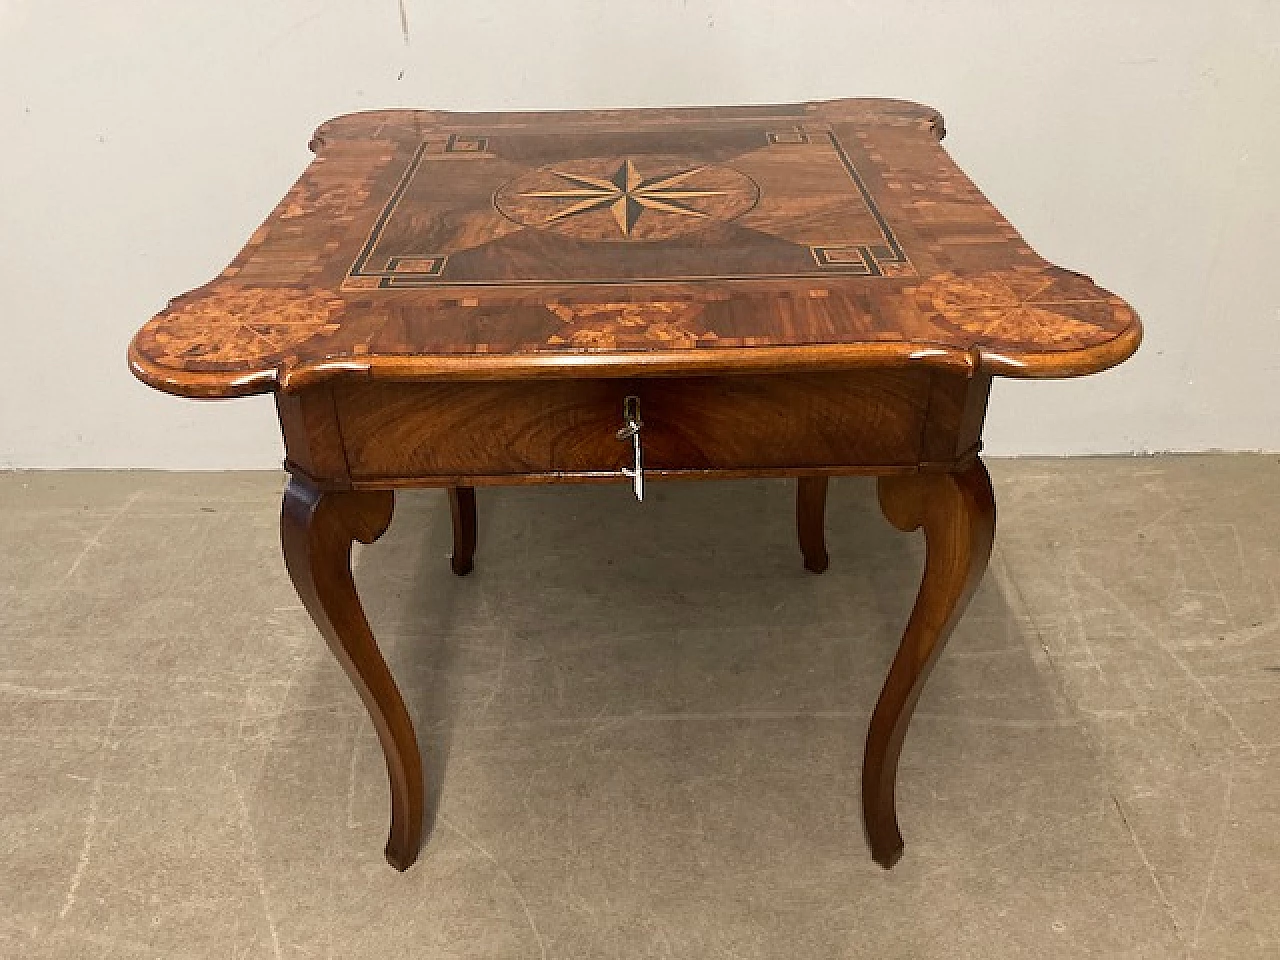 Rolo inlaid wood game table, late 18th century 2